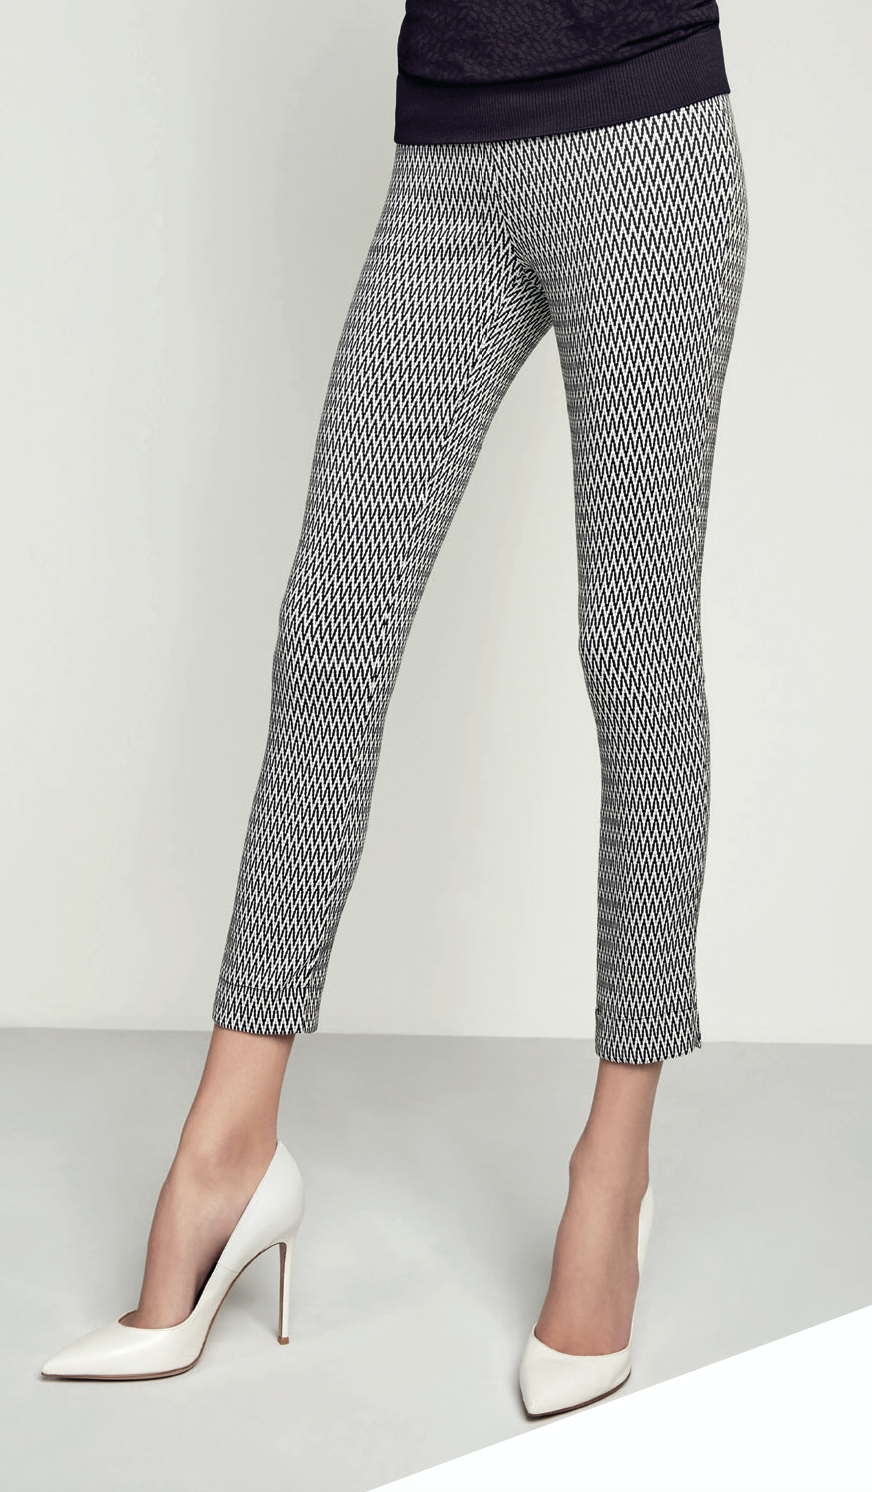 Omsa Ziggy Leggings - Black and white woven zig-zag patterned ankle length trouser leggings (treggings) with stretch viscose and high waist.